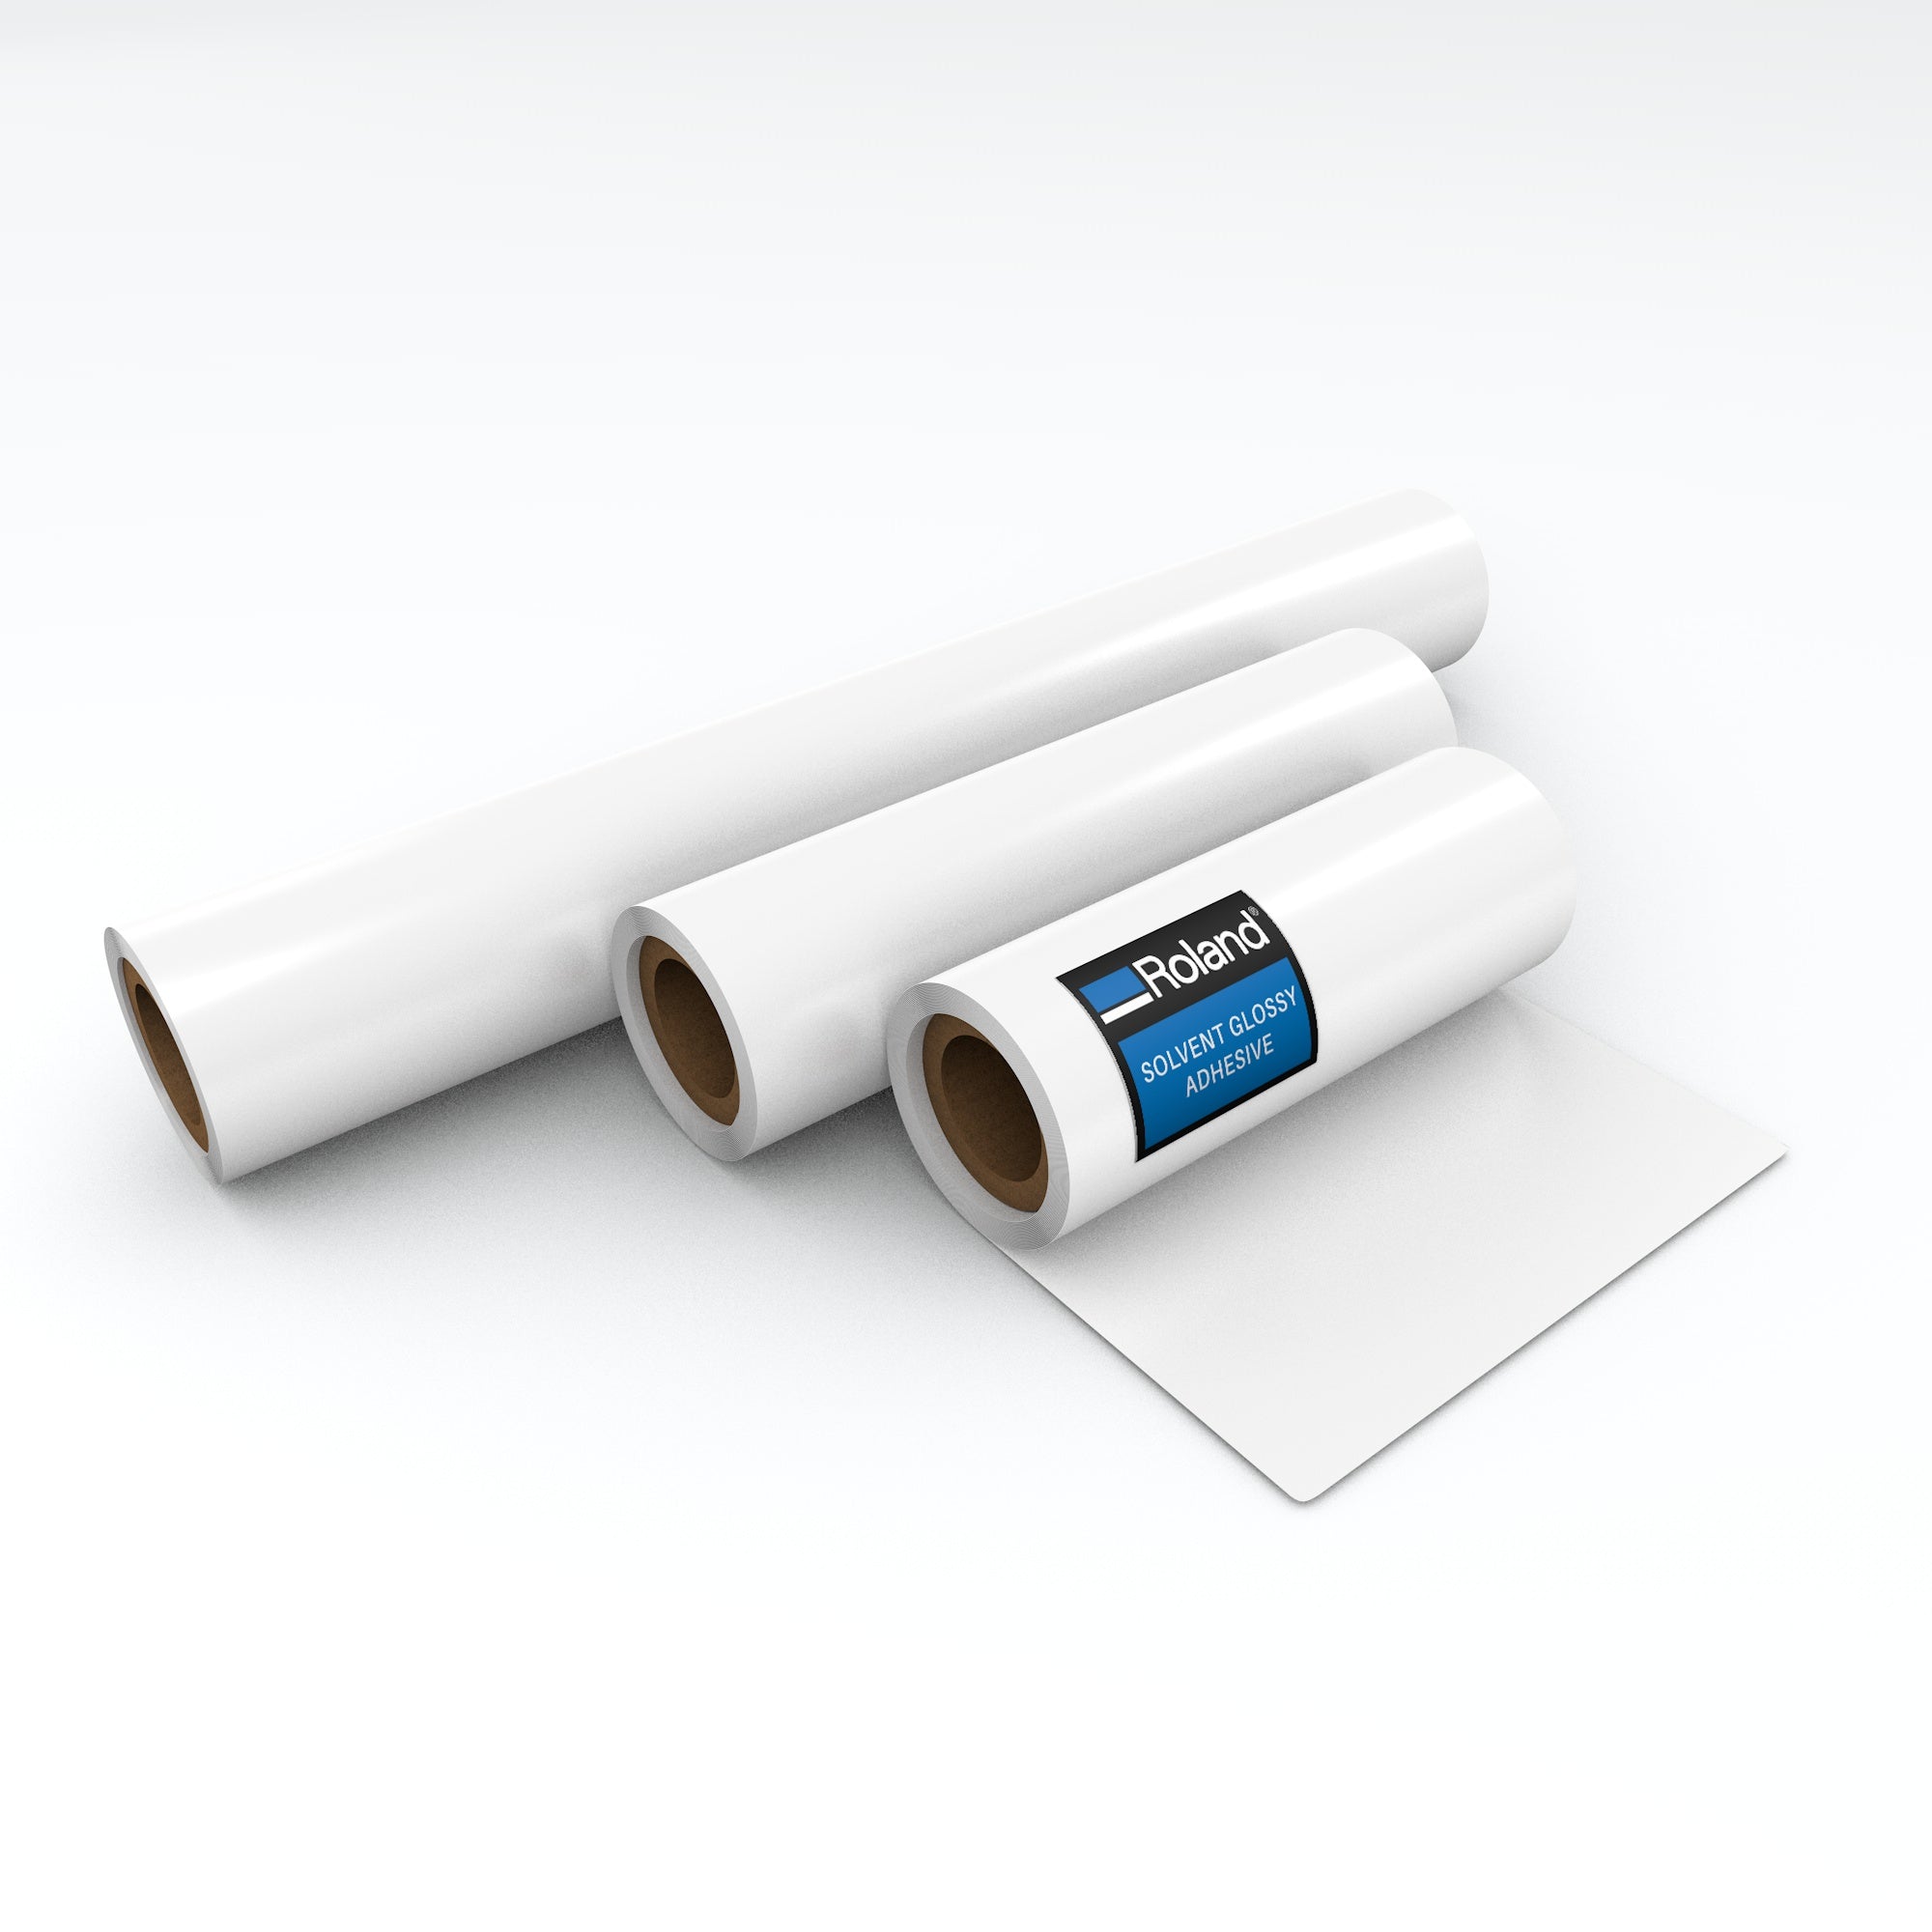 Roland solvent glossy adhesive sizes for wide format printers